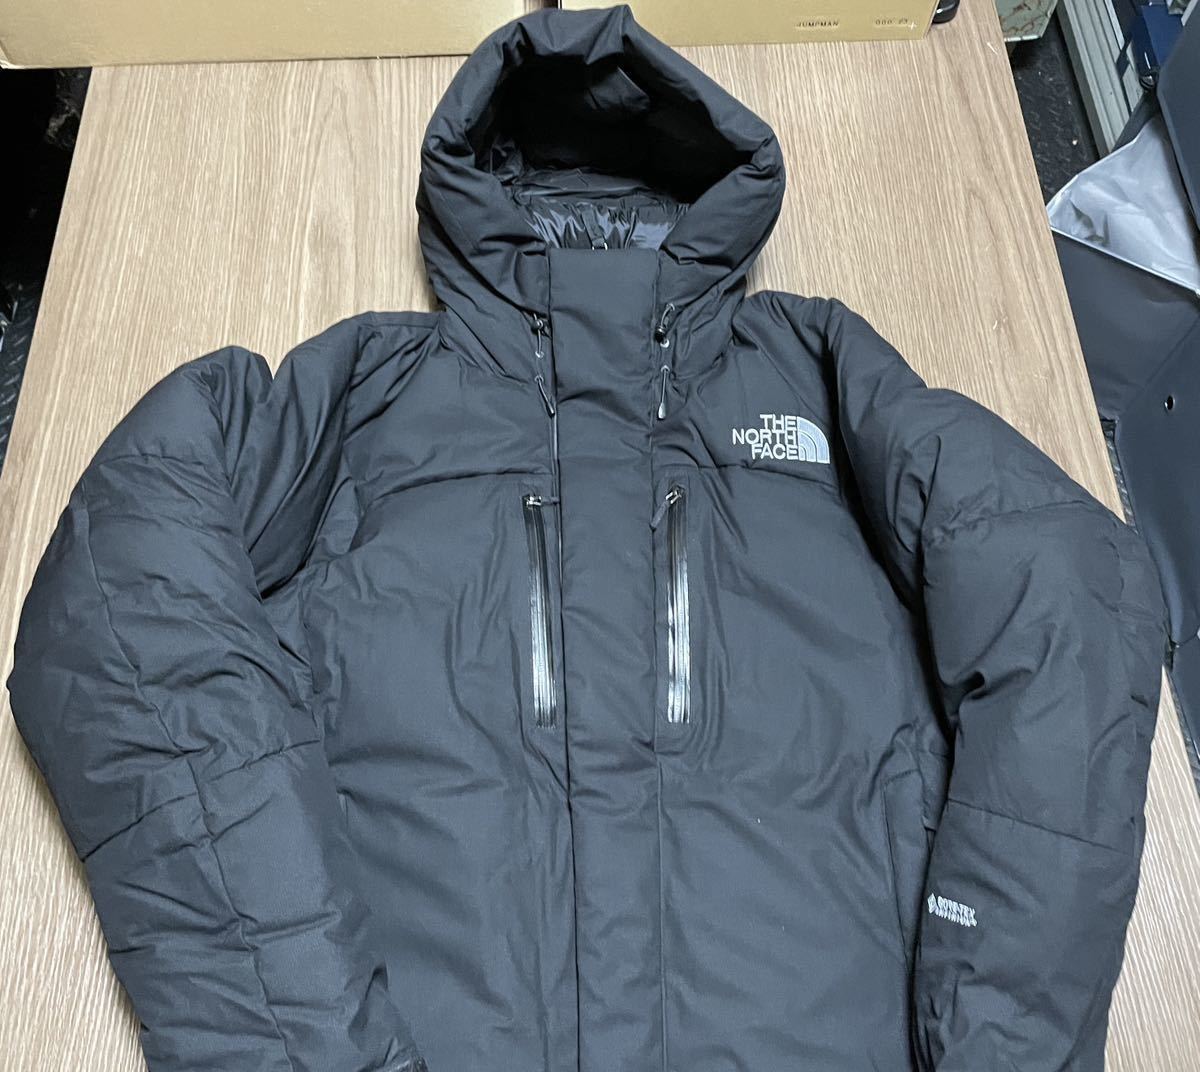 THE NORTH FACE バルトロライトジャケット Baltro LIGHT JACKET